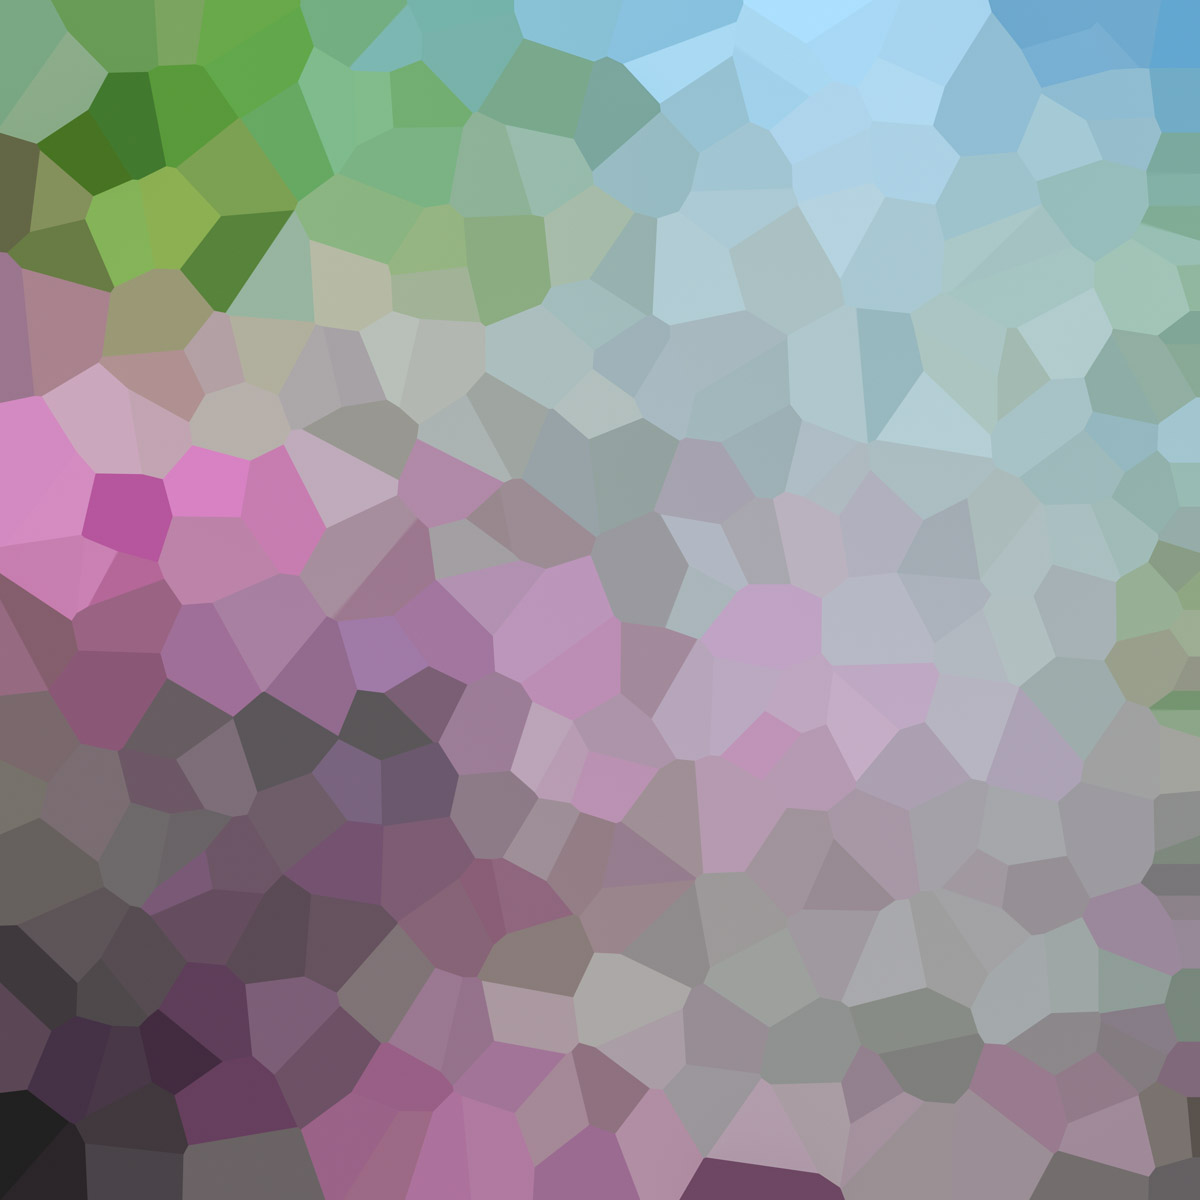 A colorful background of different colors and shapes.